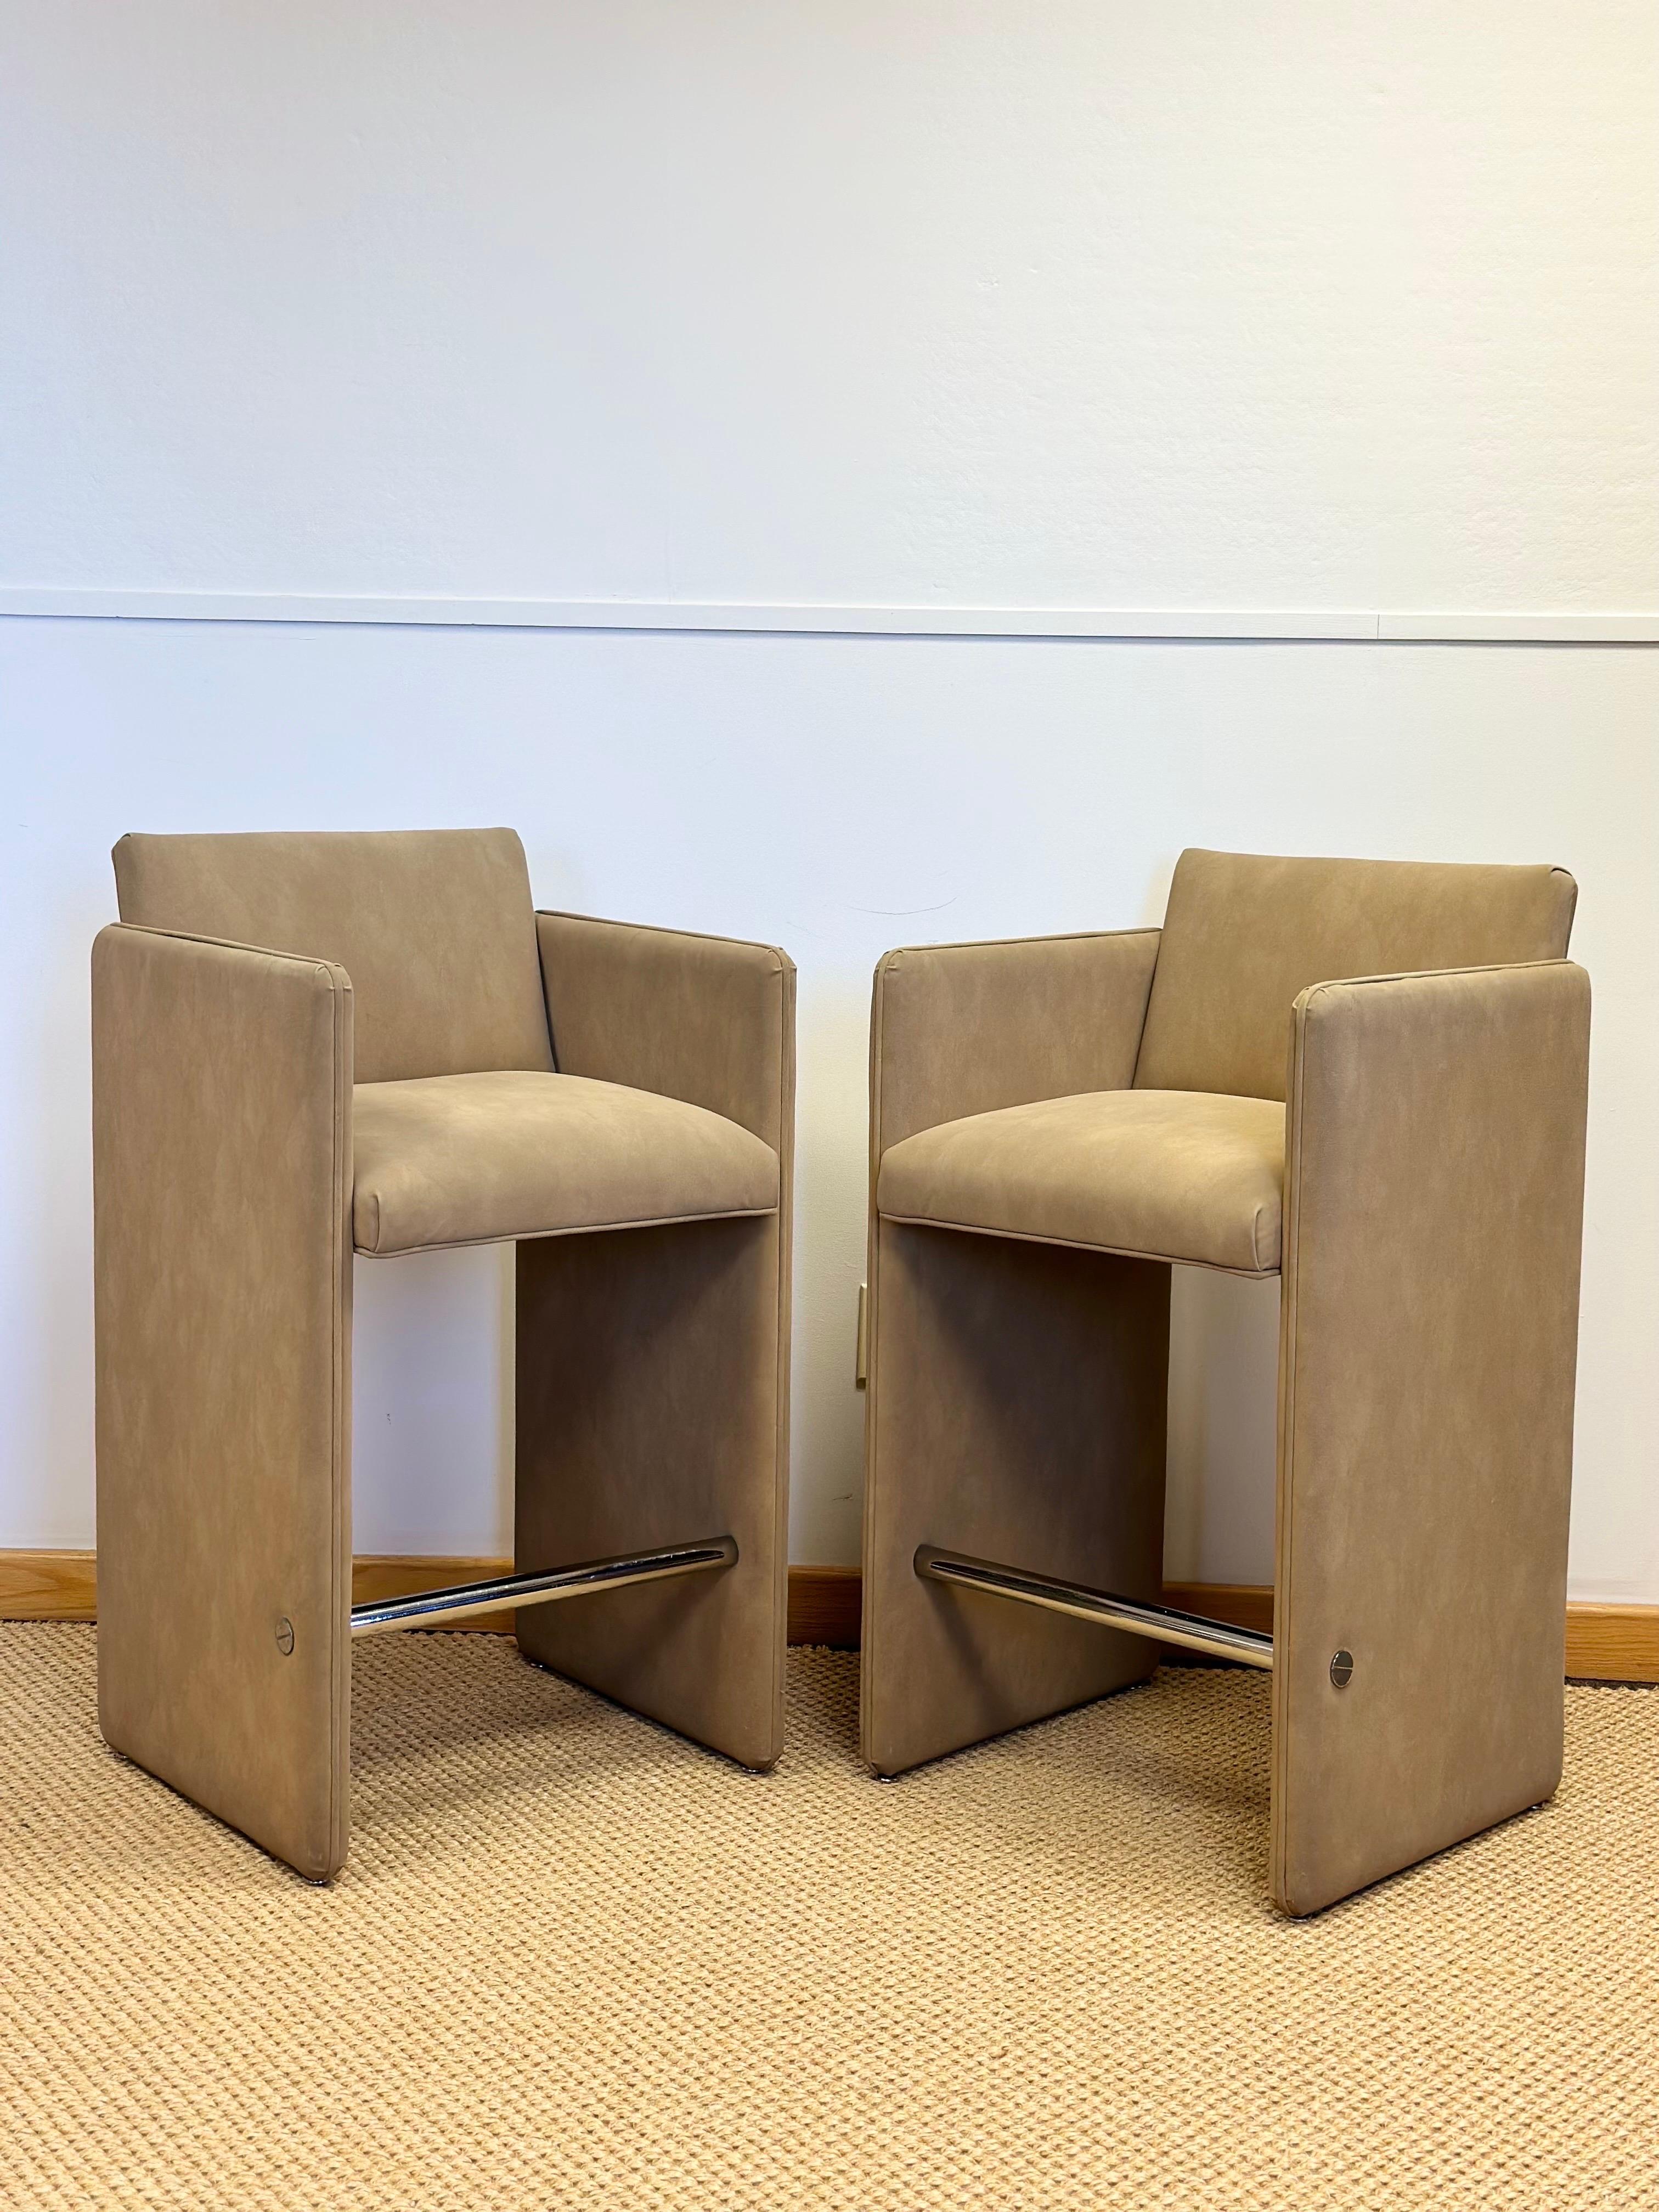 We are very pleased to offer a stylish, unique pair of bar stools, circa the 1980s.  These vintage barstools are a nod to Italian postmodernism, showcasing a distinct architectural presence.  Influenced by classical proportions and timeless design